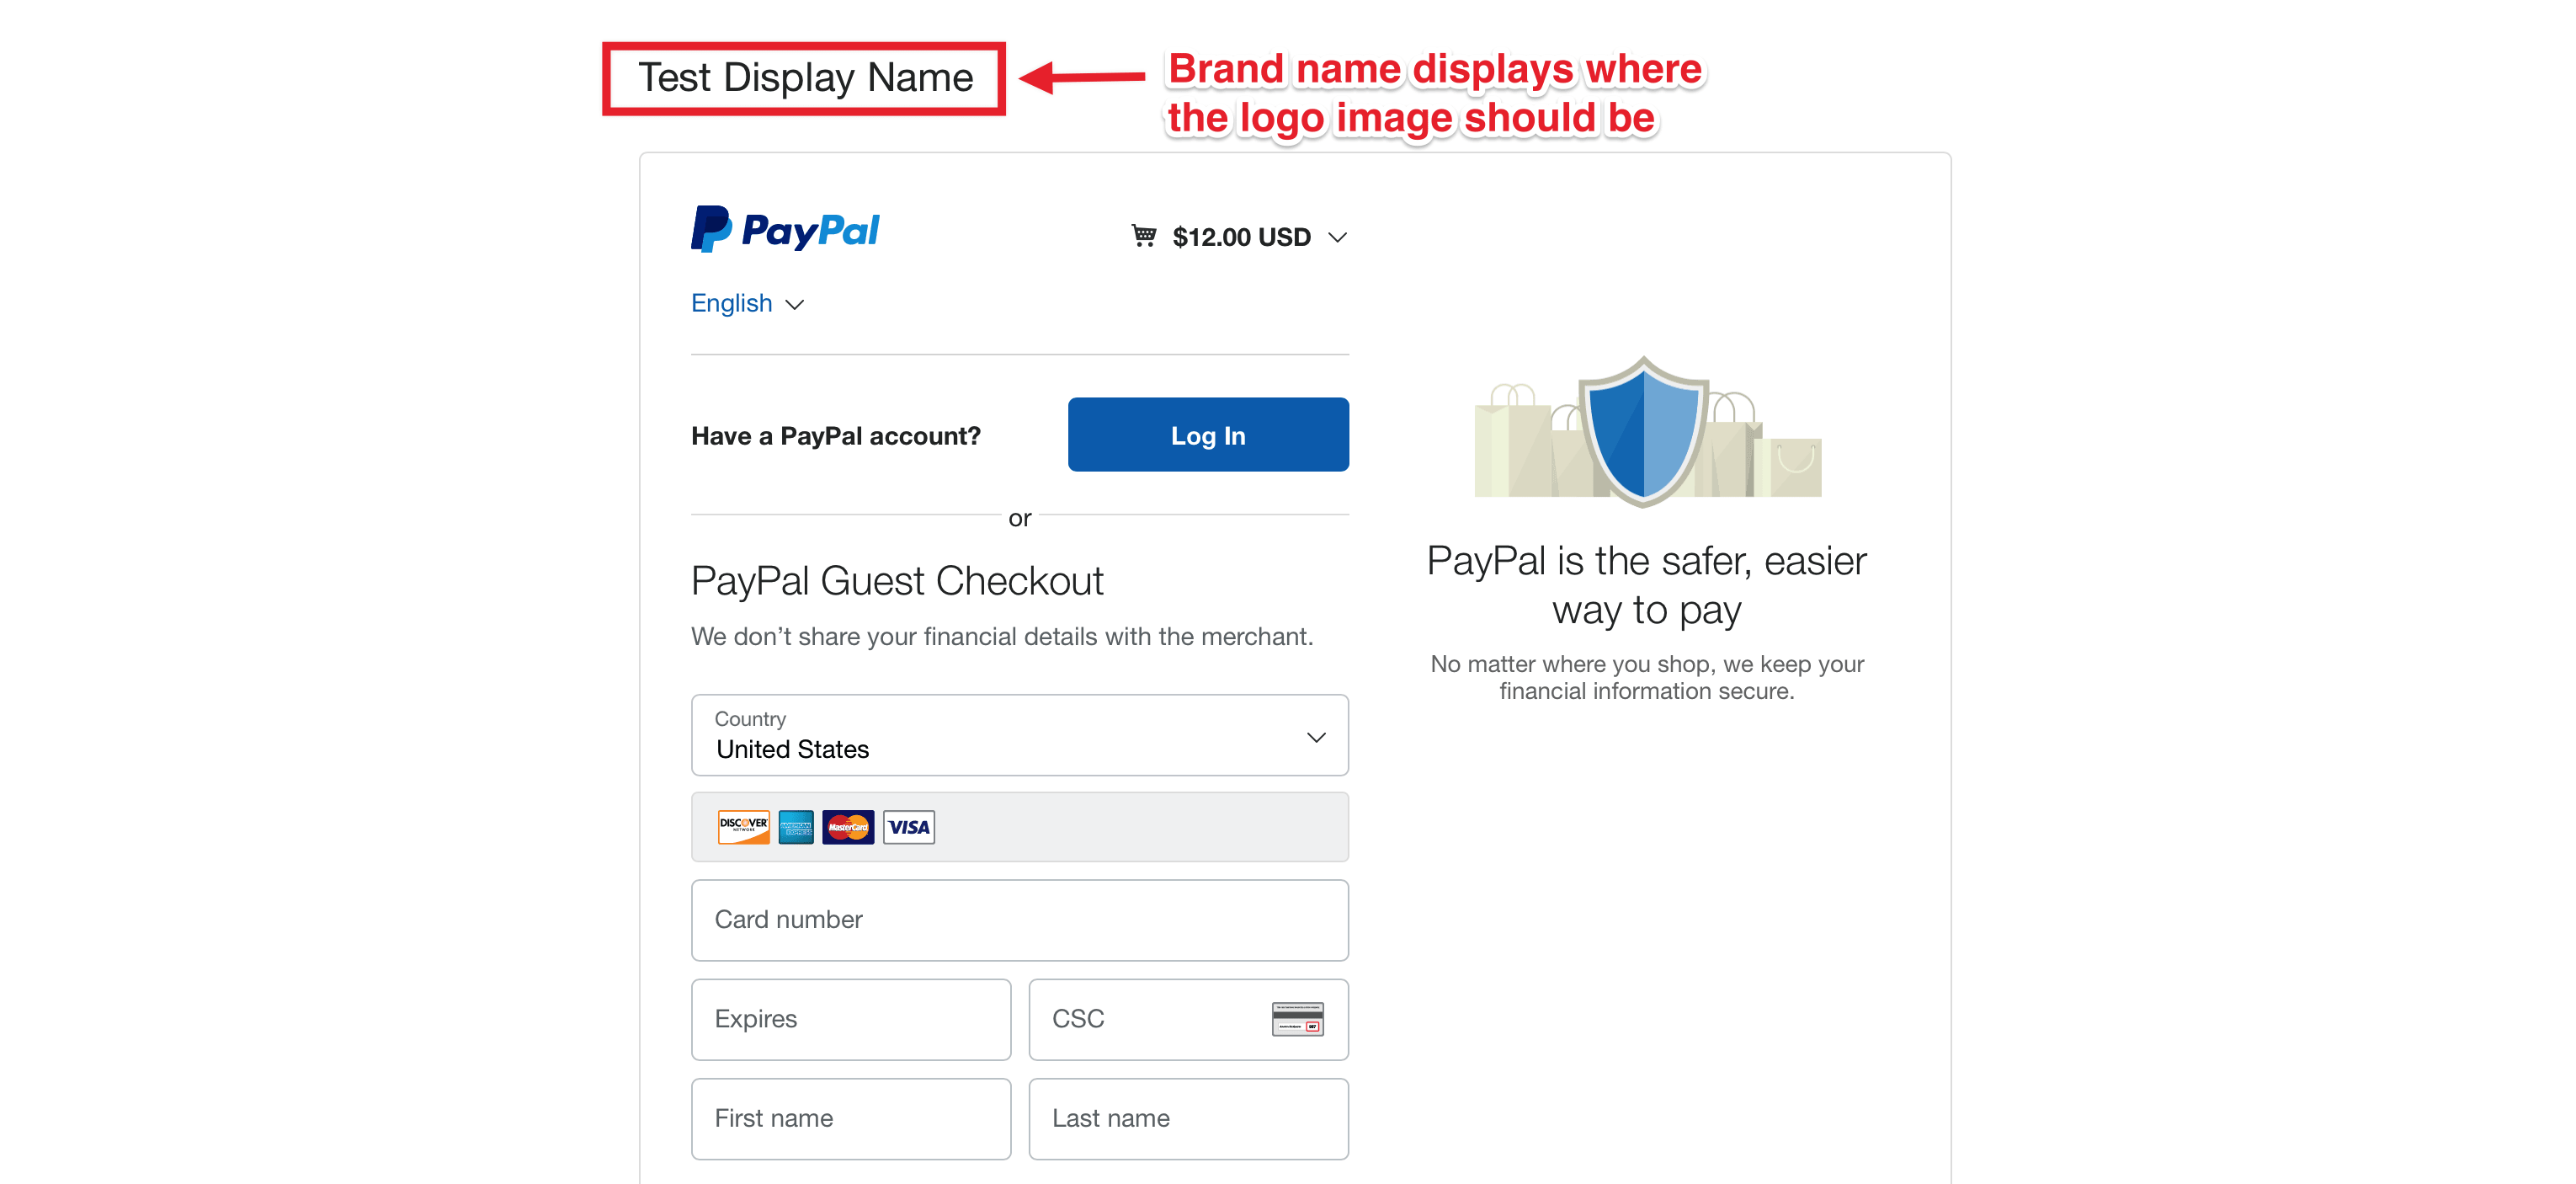 First PayPal Logo - Logo Image not displaying in PayPal Checkout page · Issue